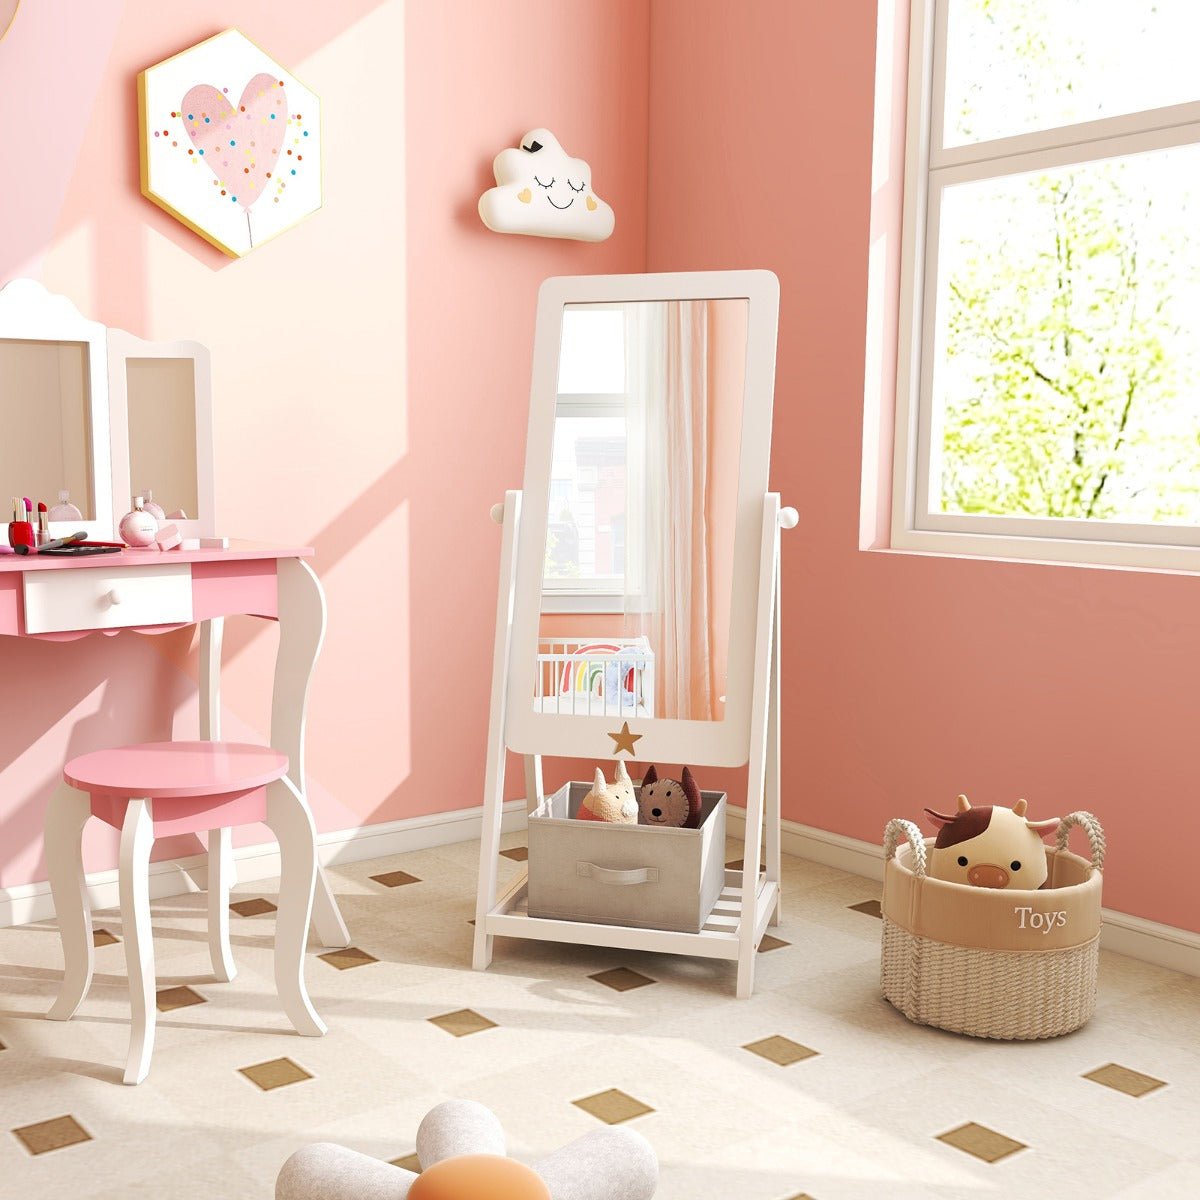 Get Dressed Up with Our Kid-Friendly Dressing Mirror!